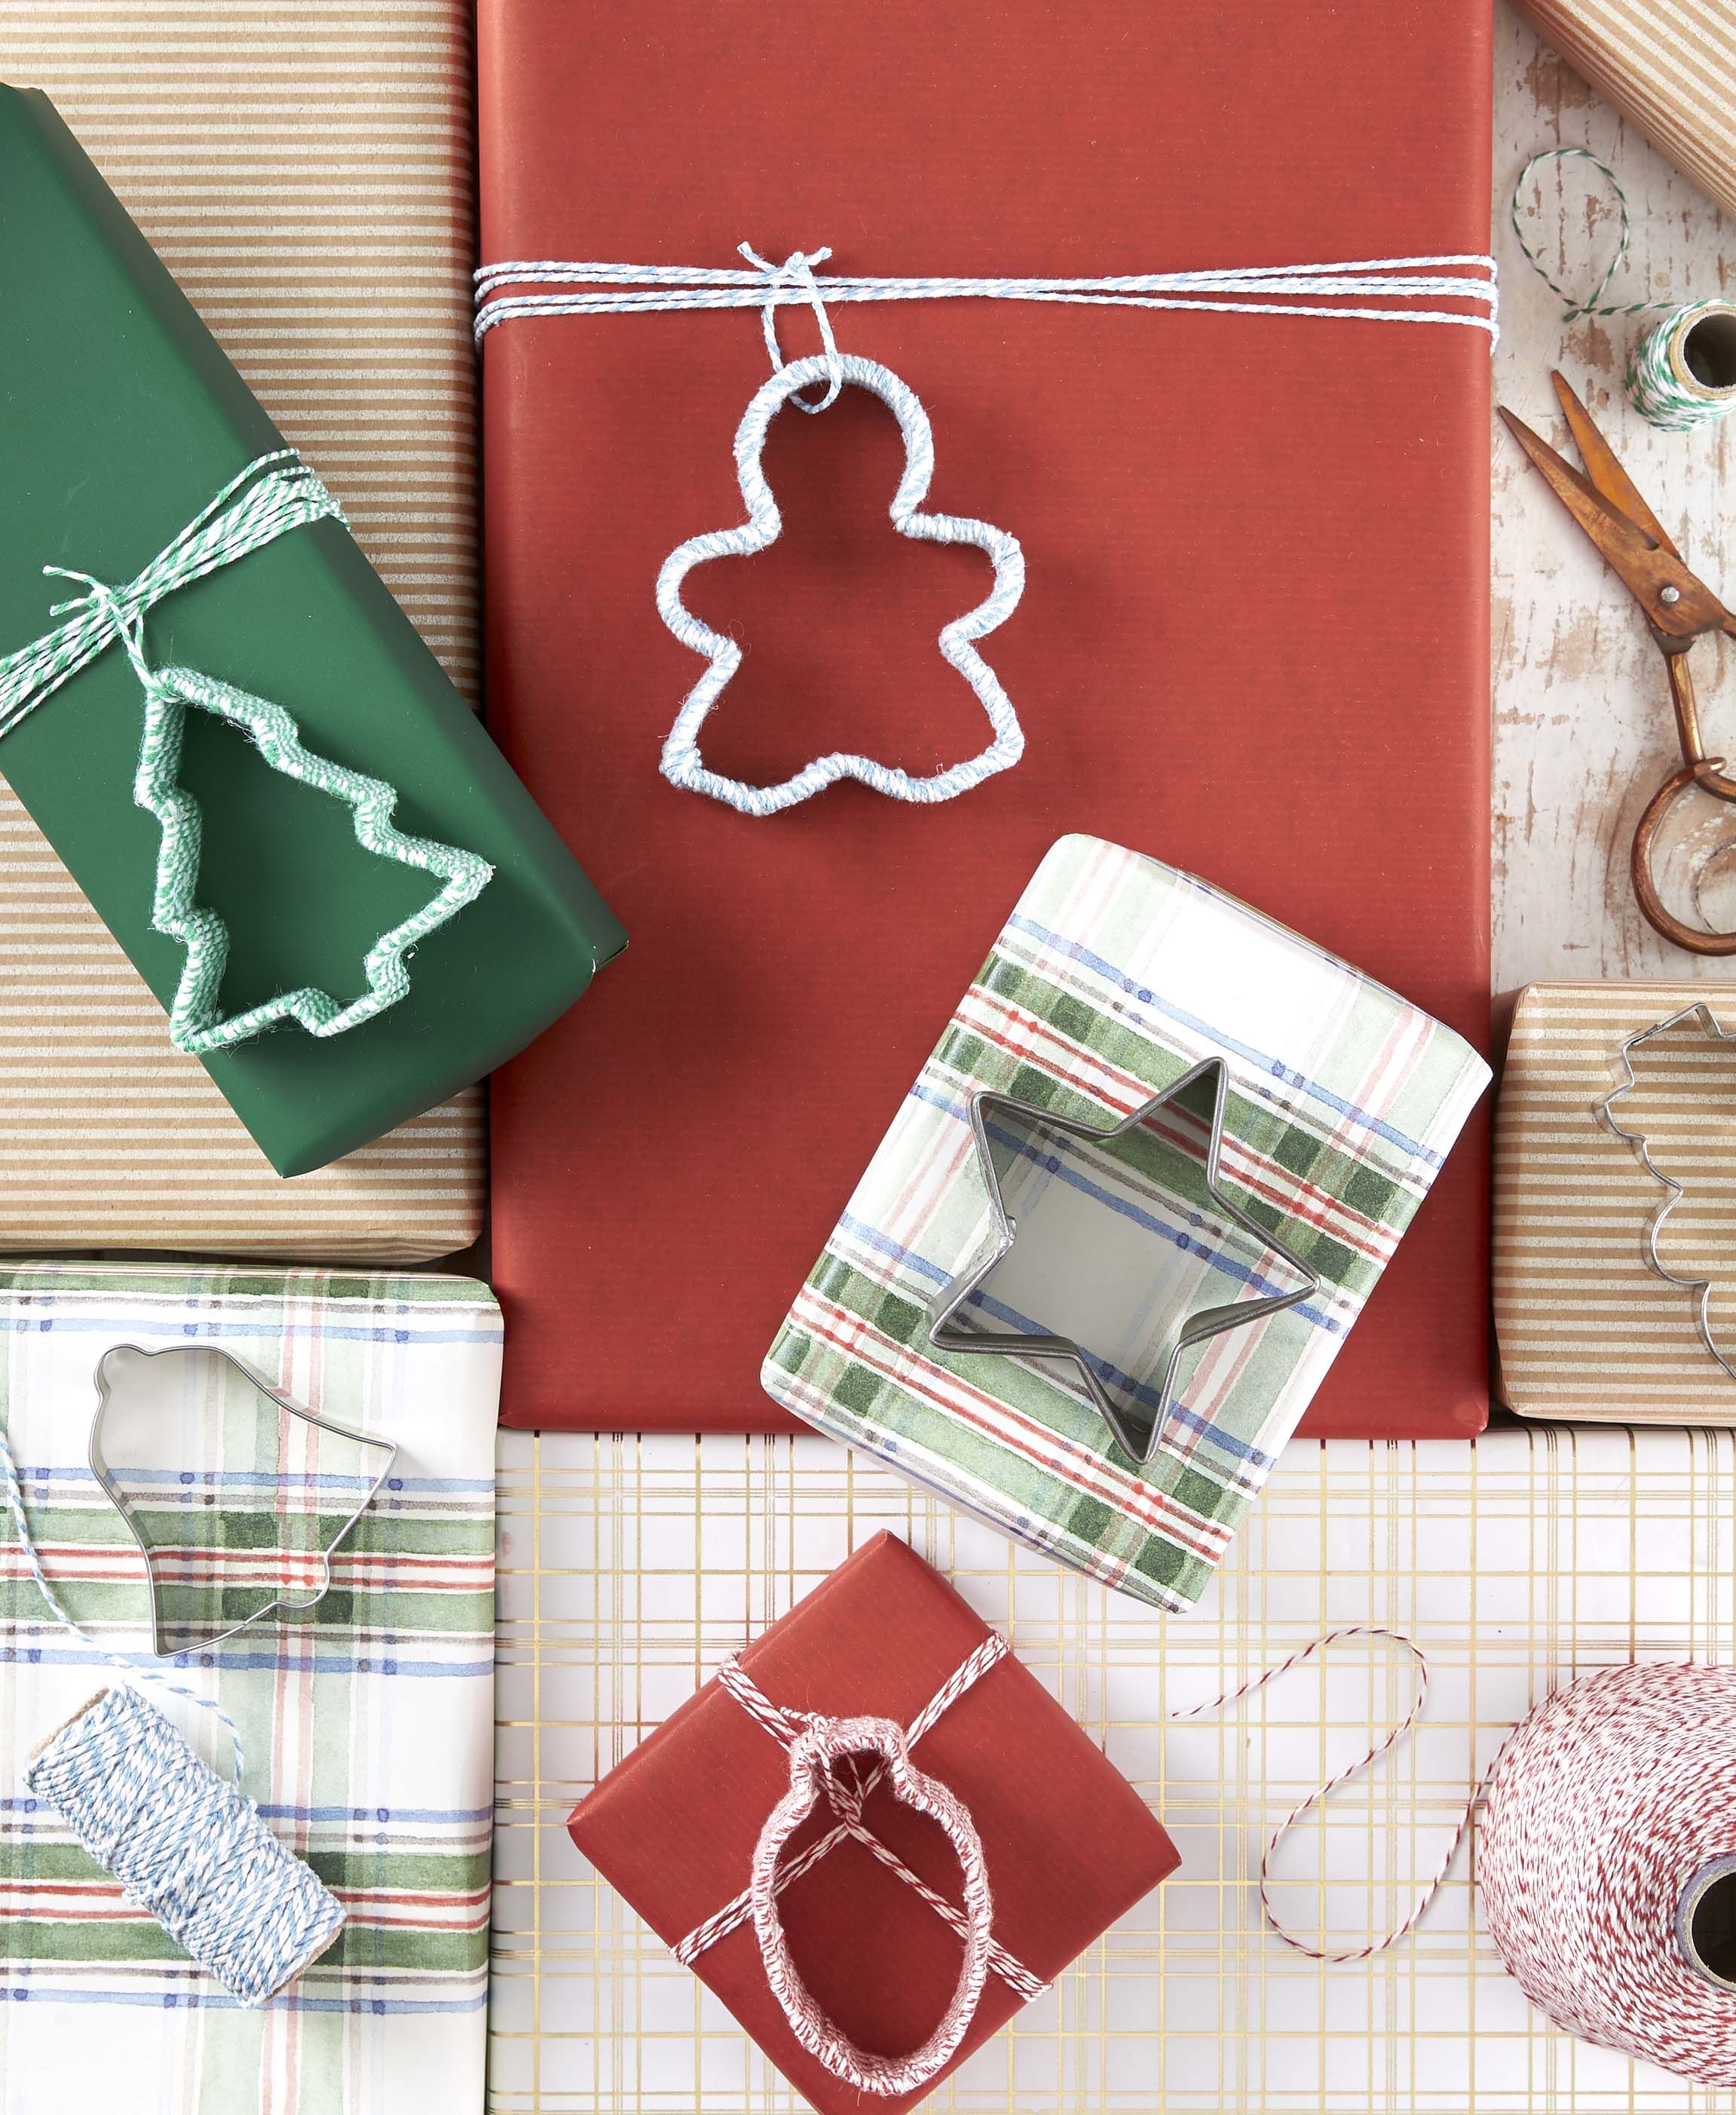 50 Homemade Christmas gifts {15 minutes!} - It's Always Autumn